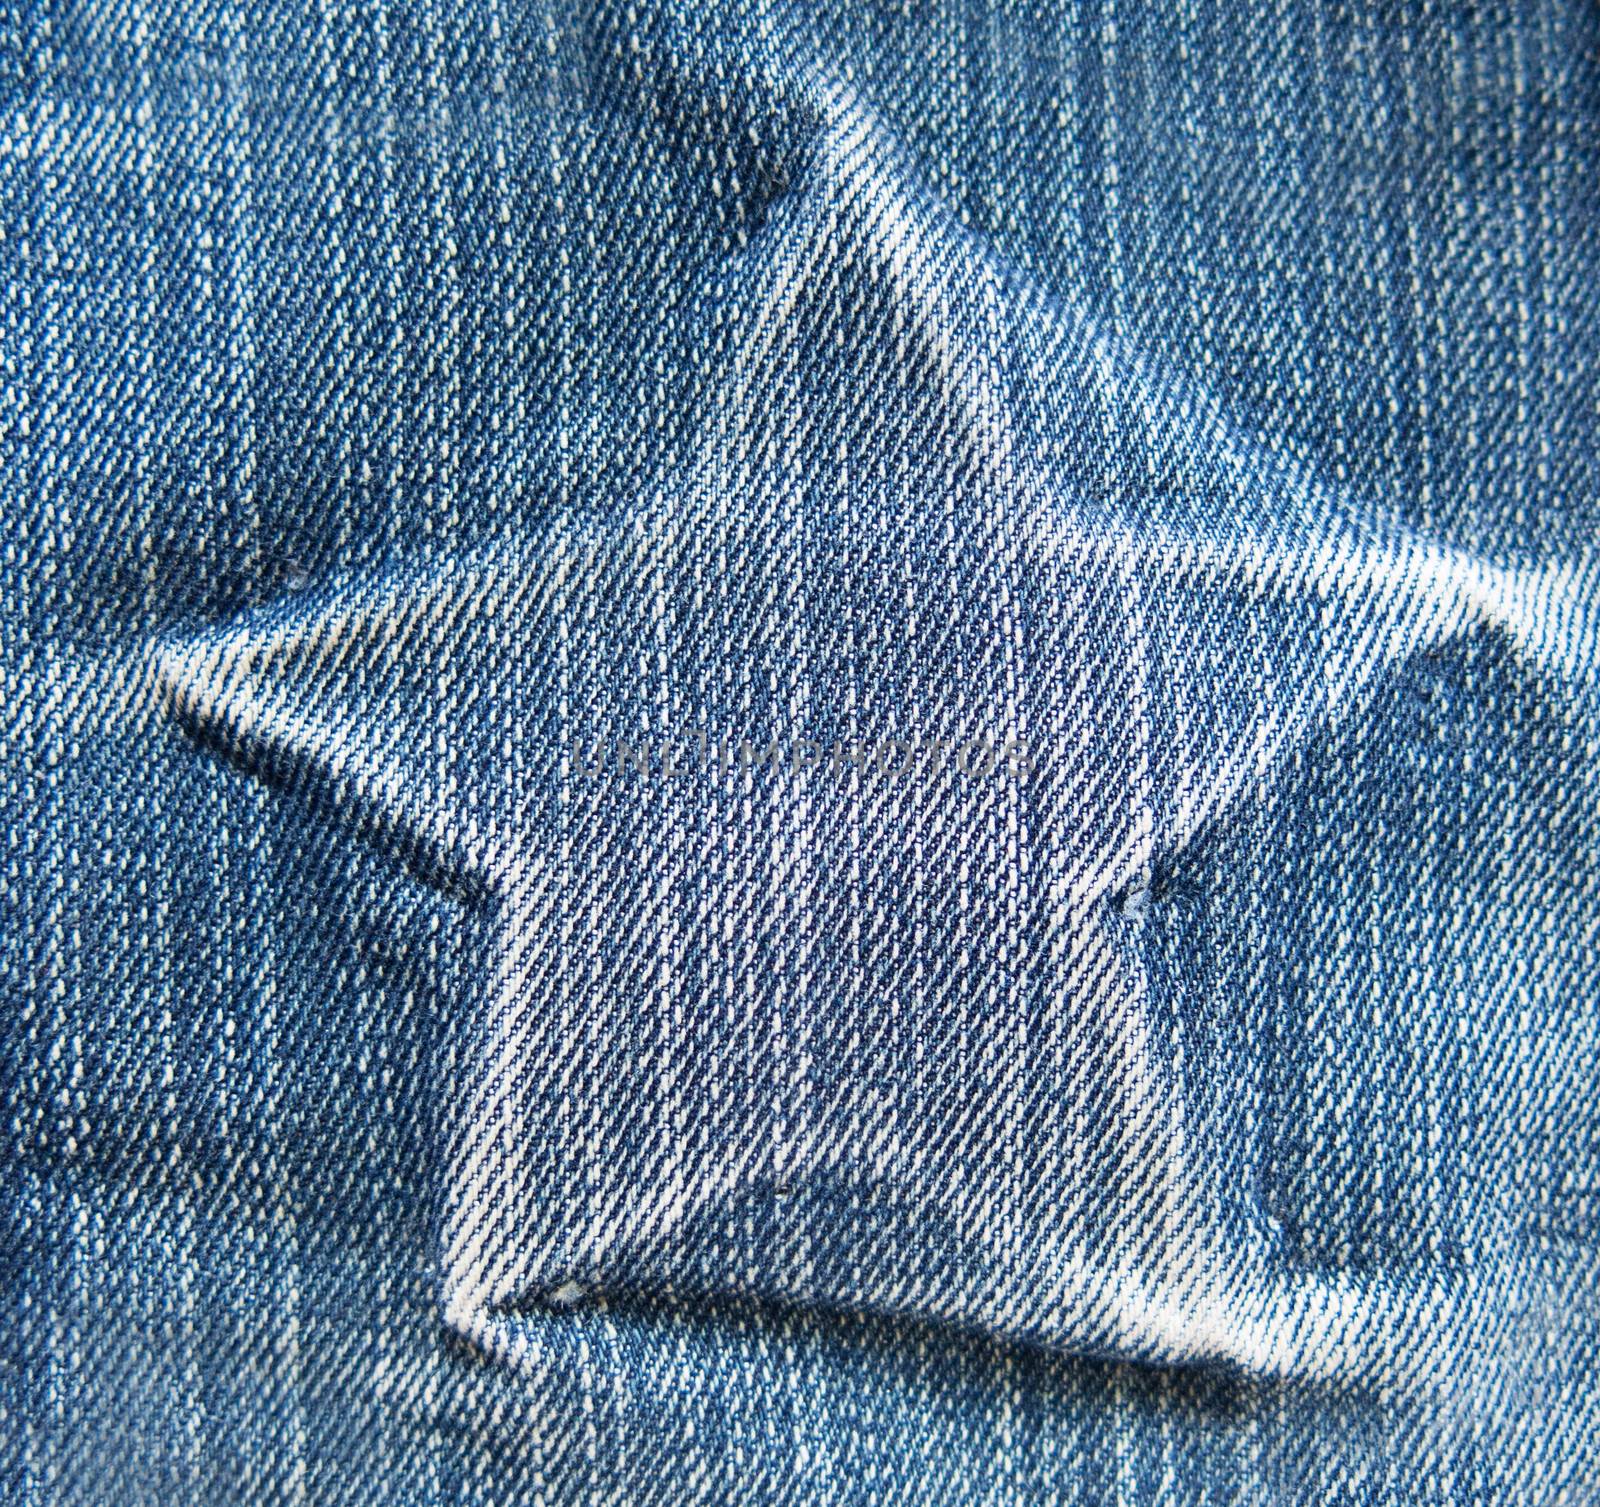 star on denim texture. light blue natural clean denim texture for the traditional business background in cold bright colors with diagonal shift tilt lines and stitches